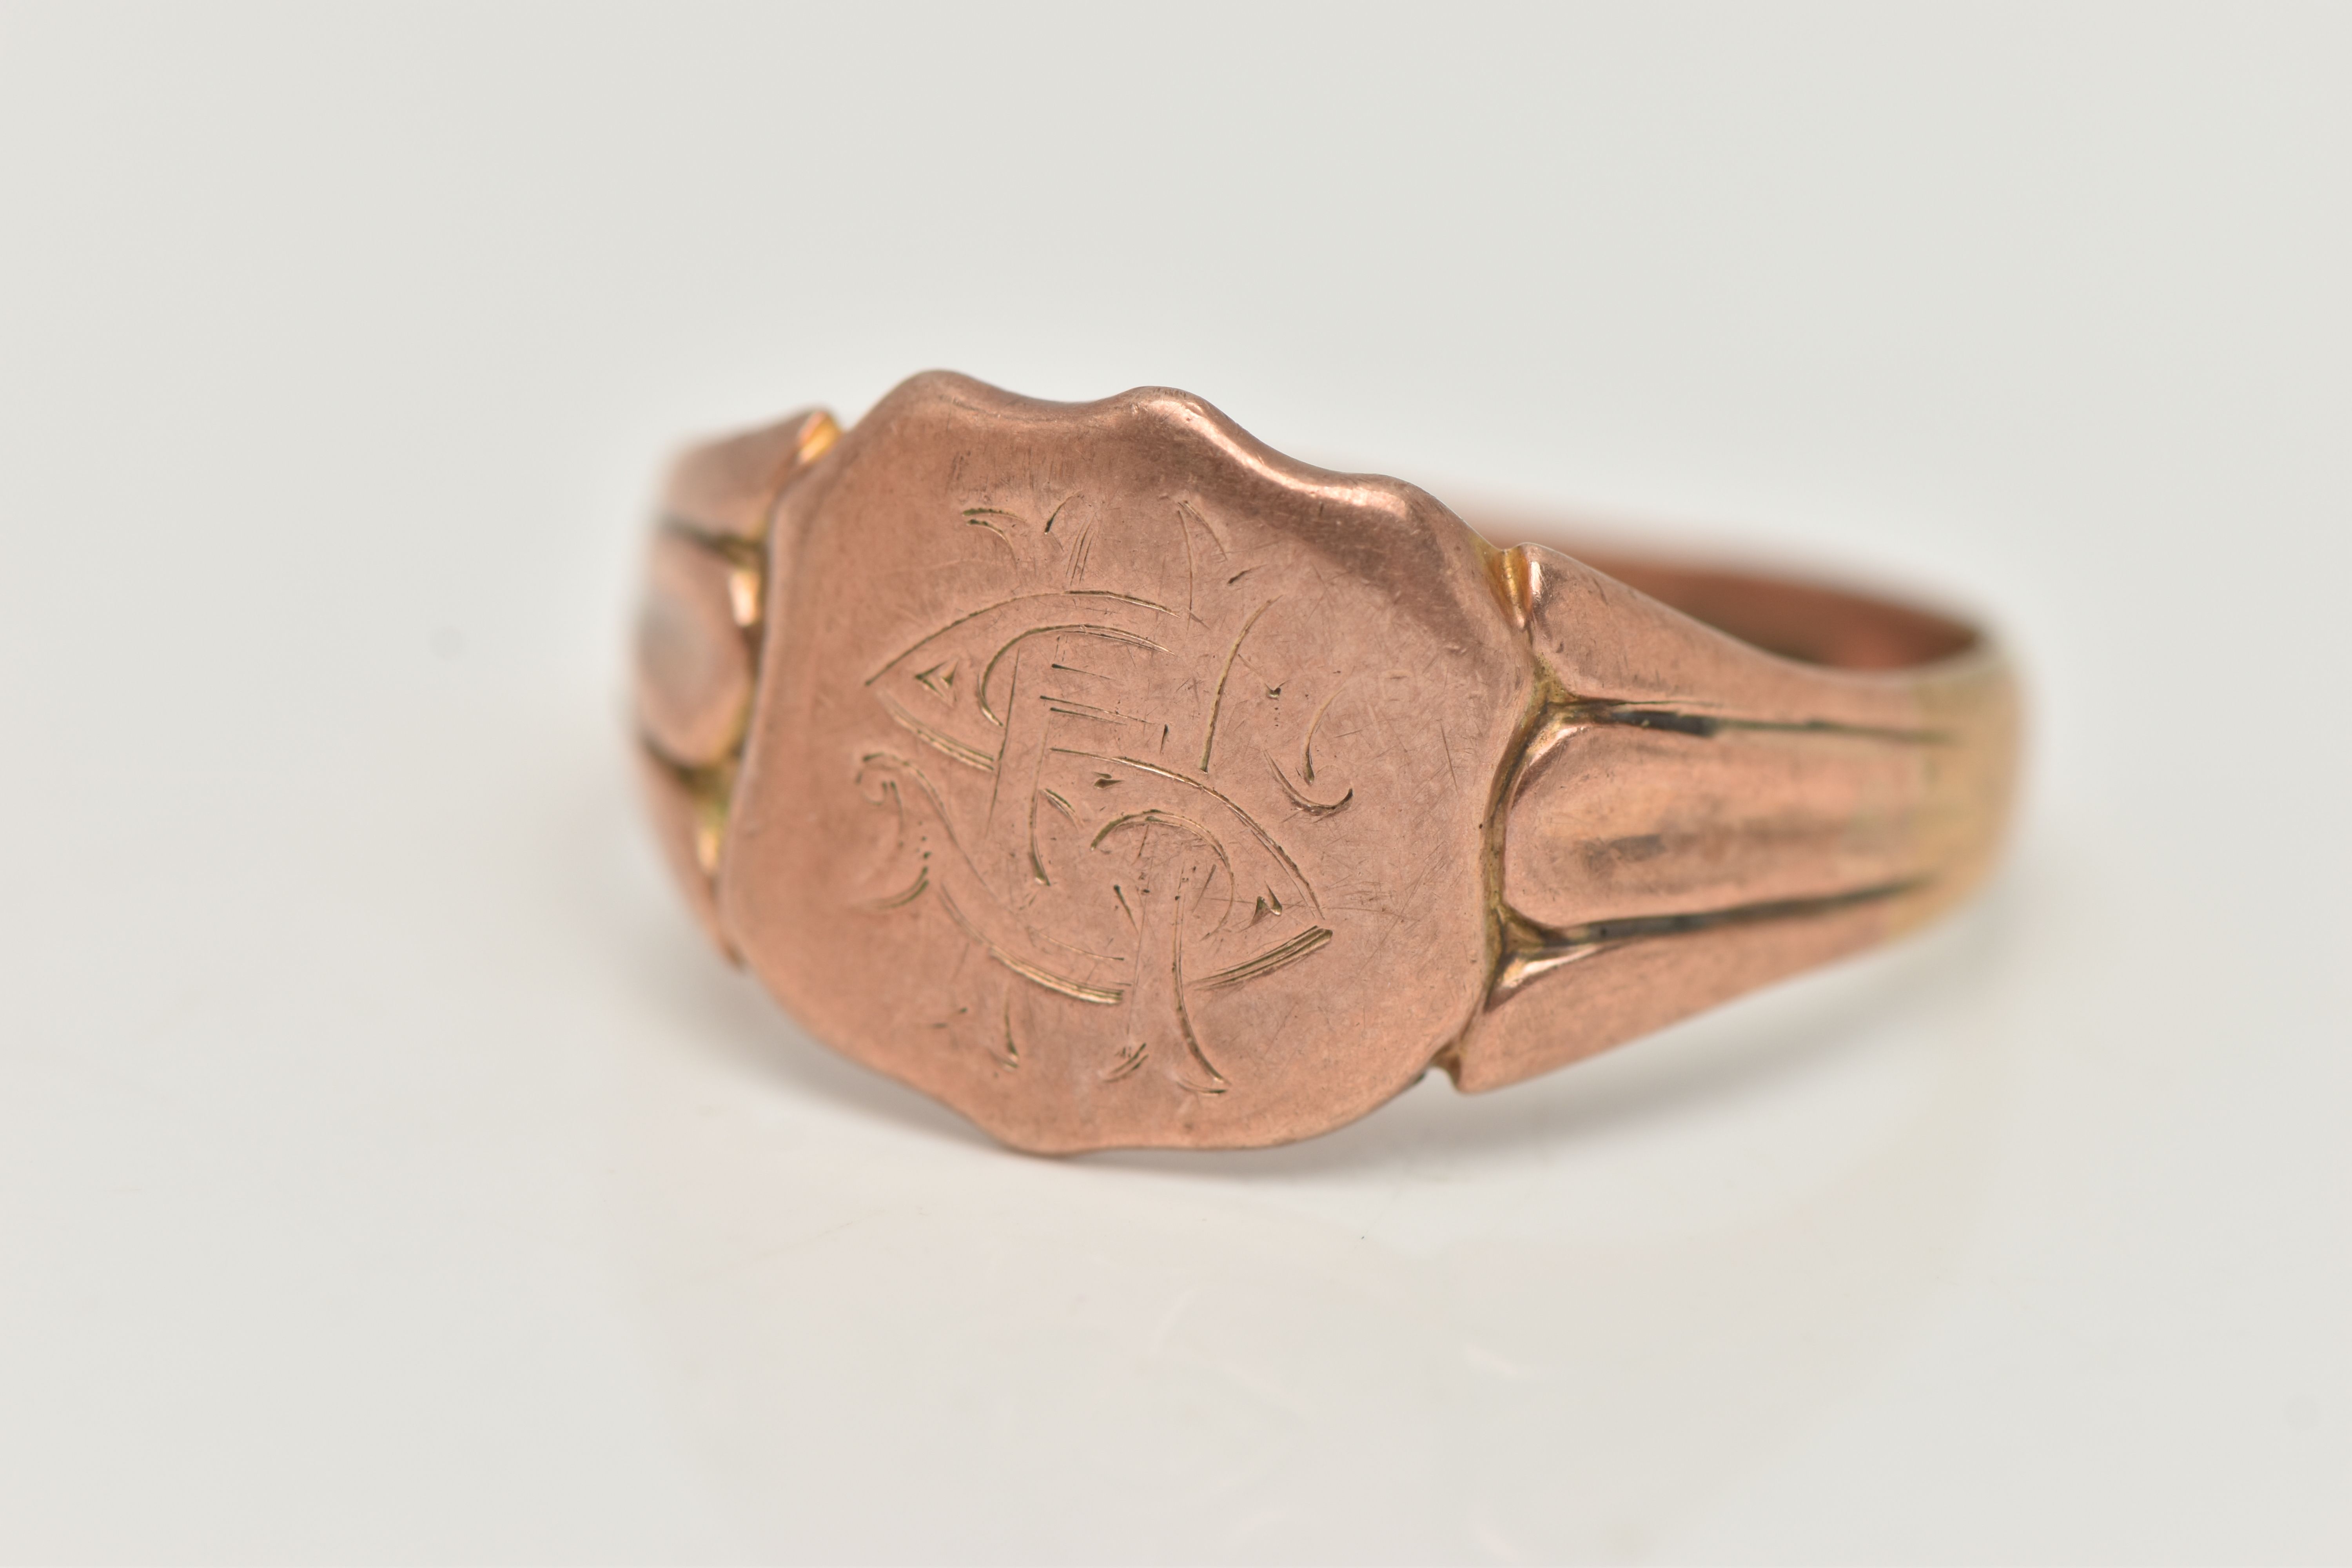 A GENTS 9CT ROSE GOLD SIGNET RING, engraved shield signet, textured shoulders leading onto a